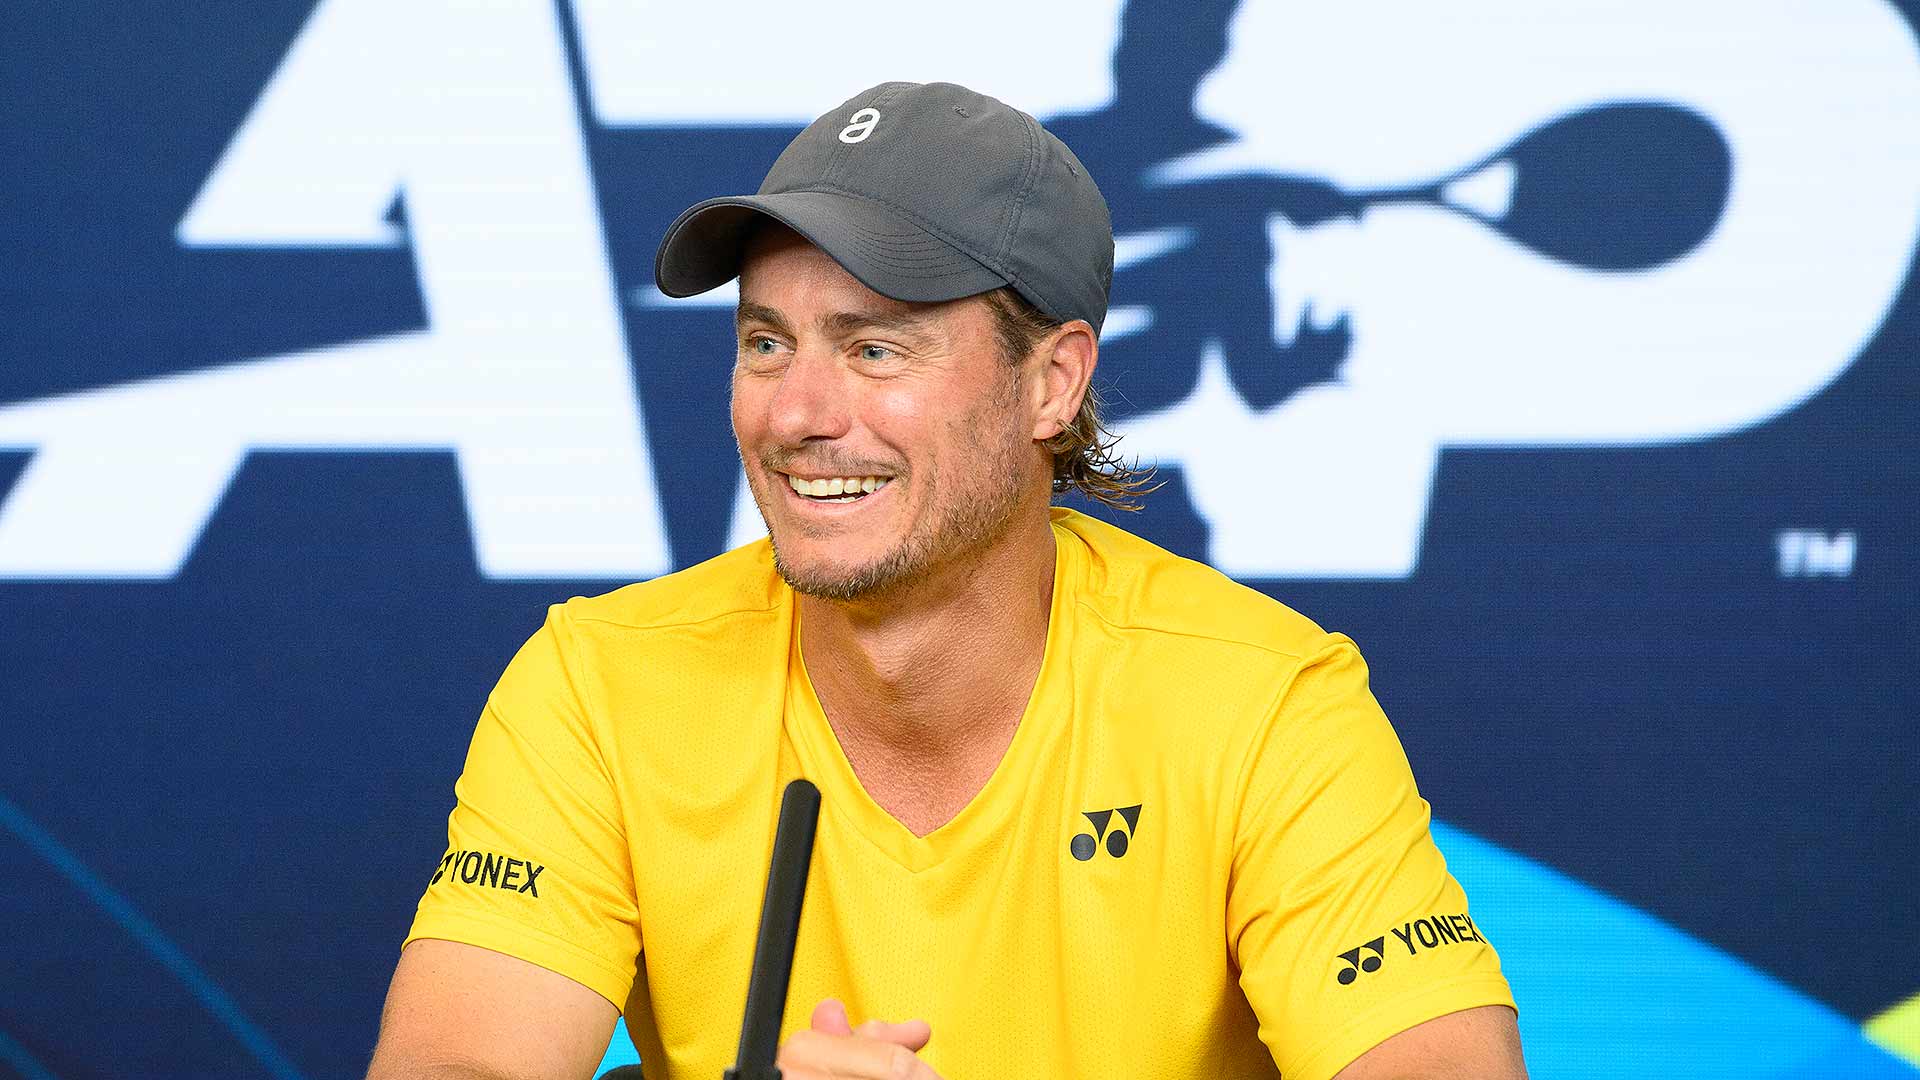 Lleyton Hewitt twice finished year-end No. 1 in the FedEx ATP Rankings.